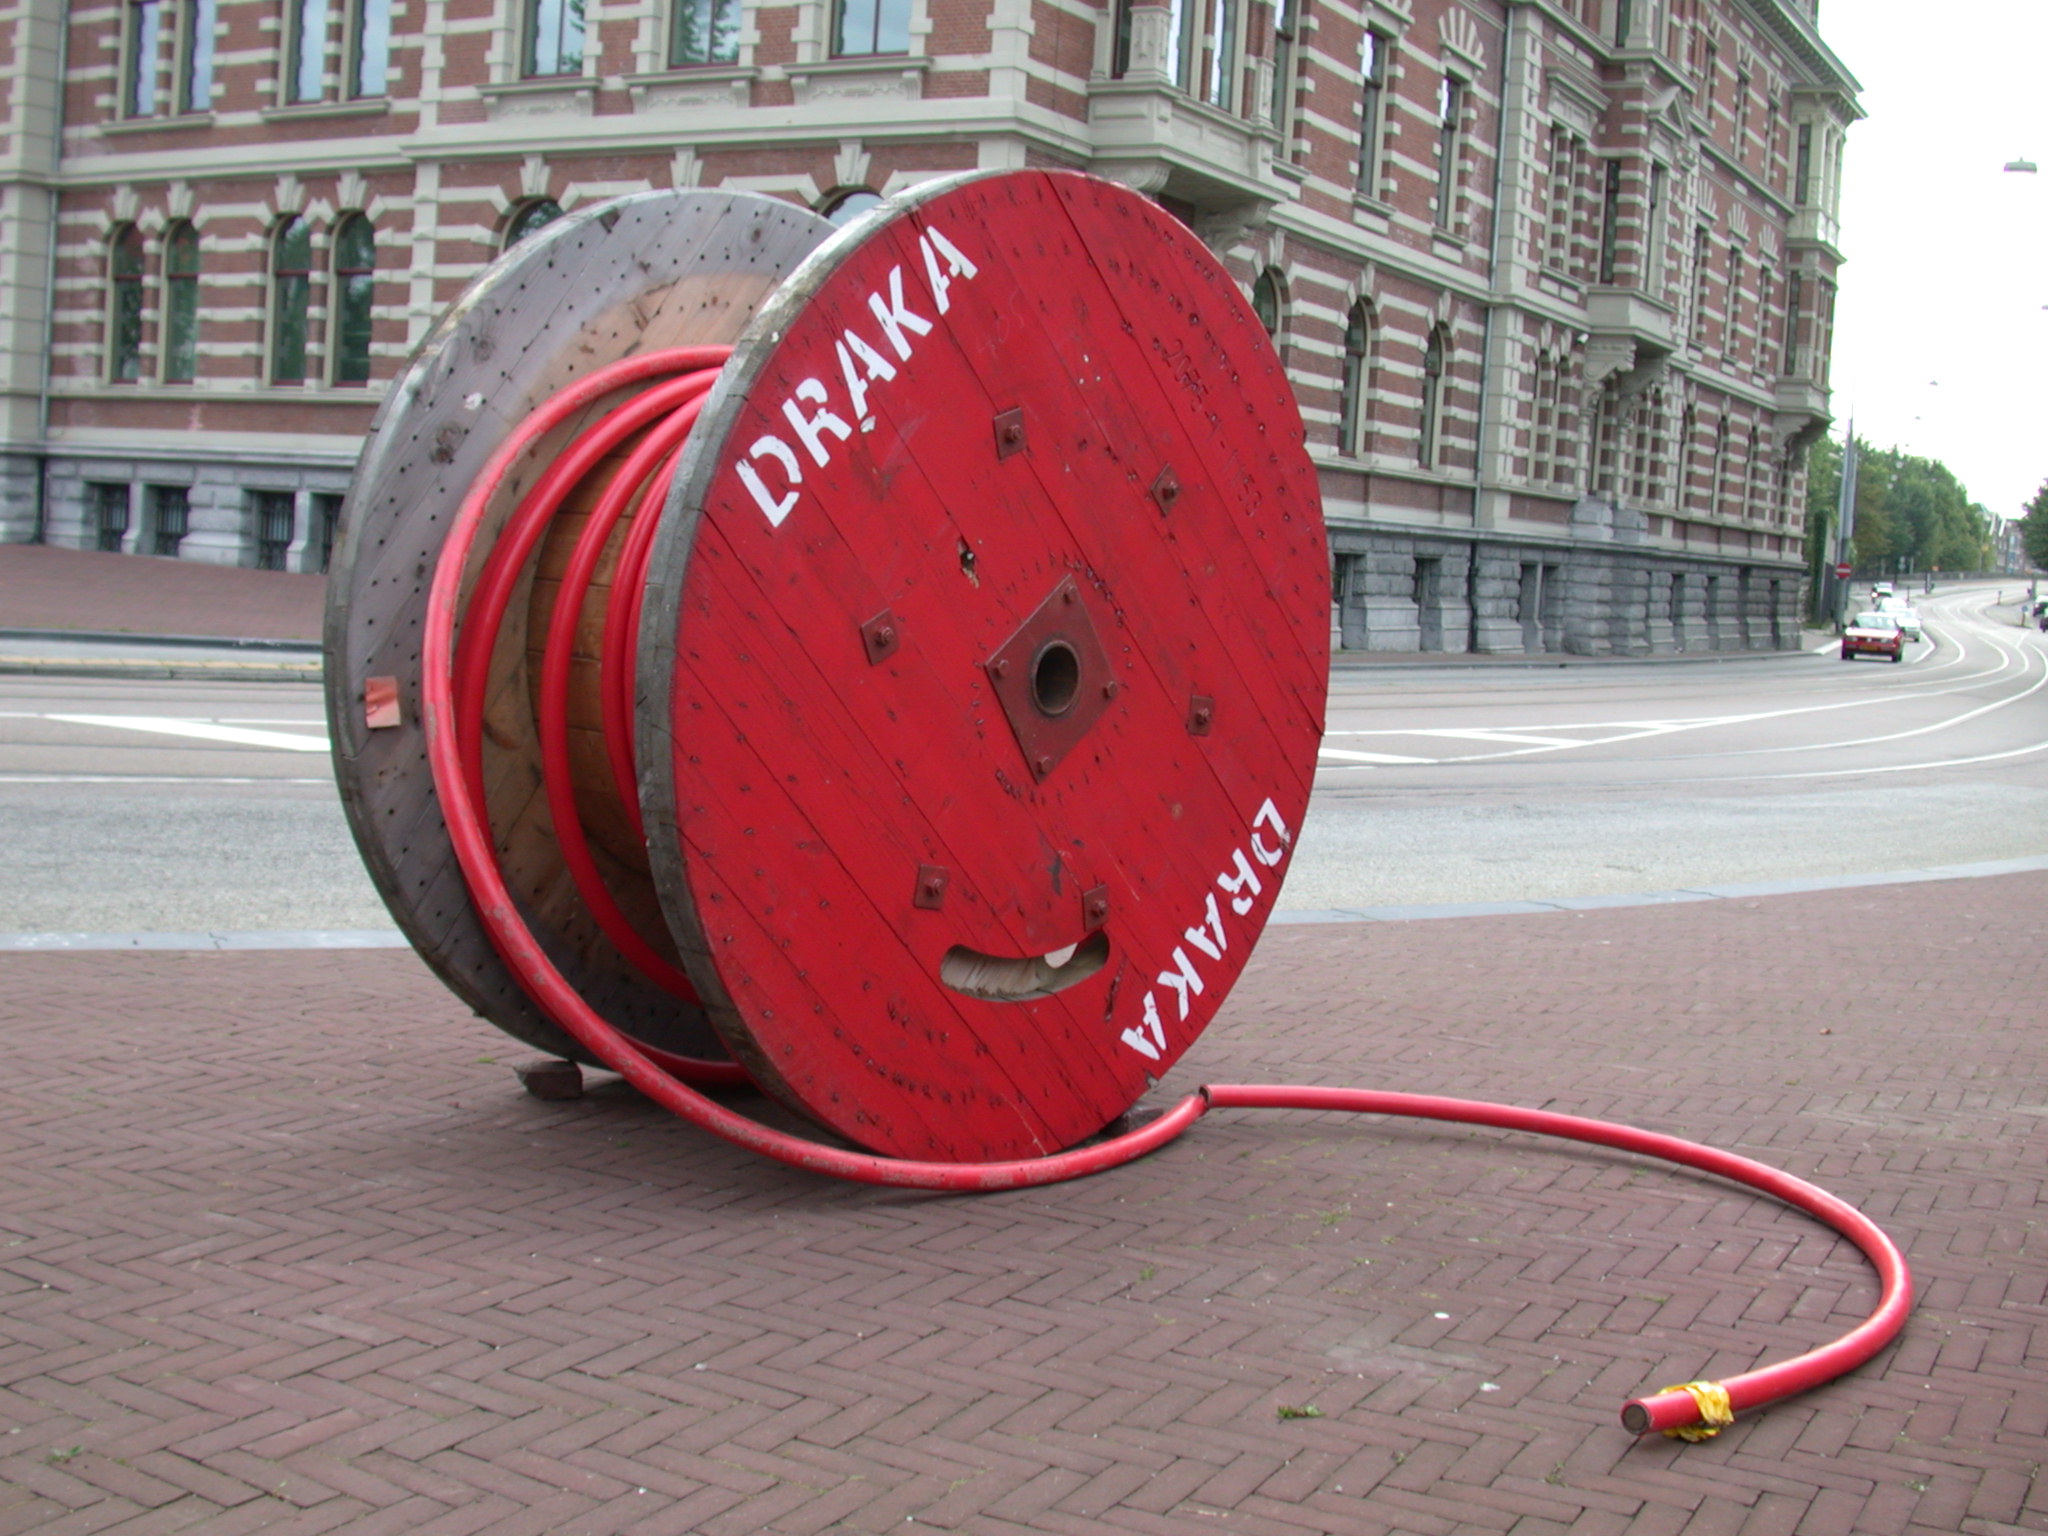 oval, objects, cable, wood, plastic, red, circular, typo, typography, draka, painted, reel